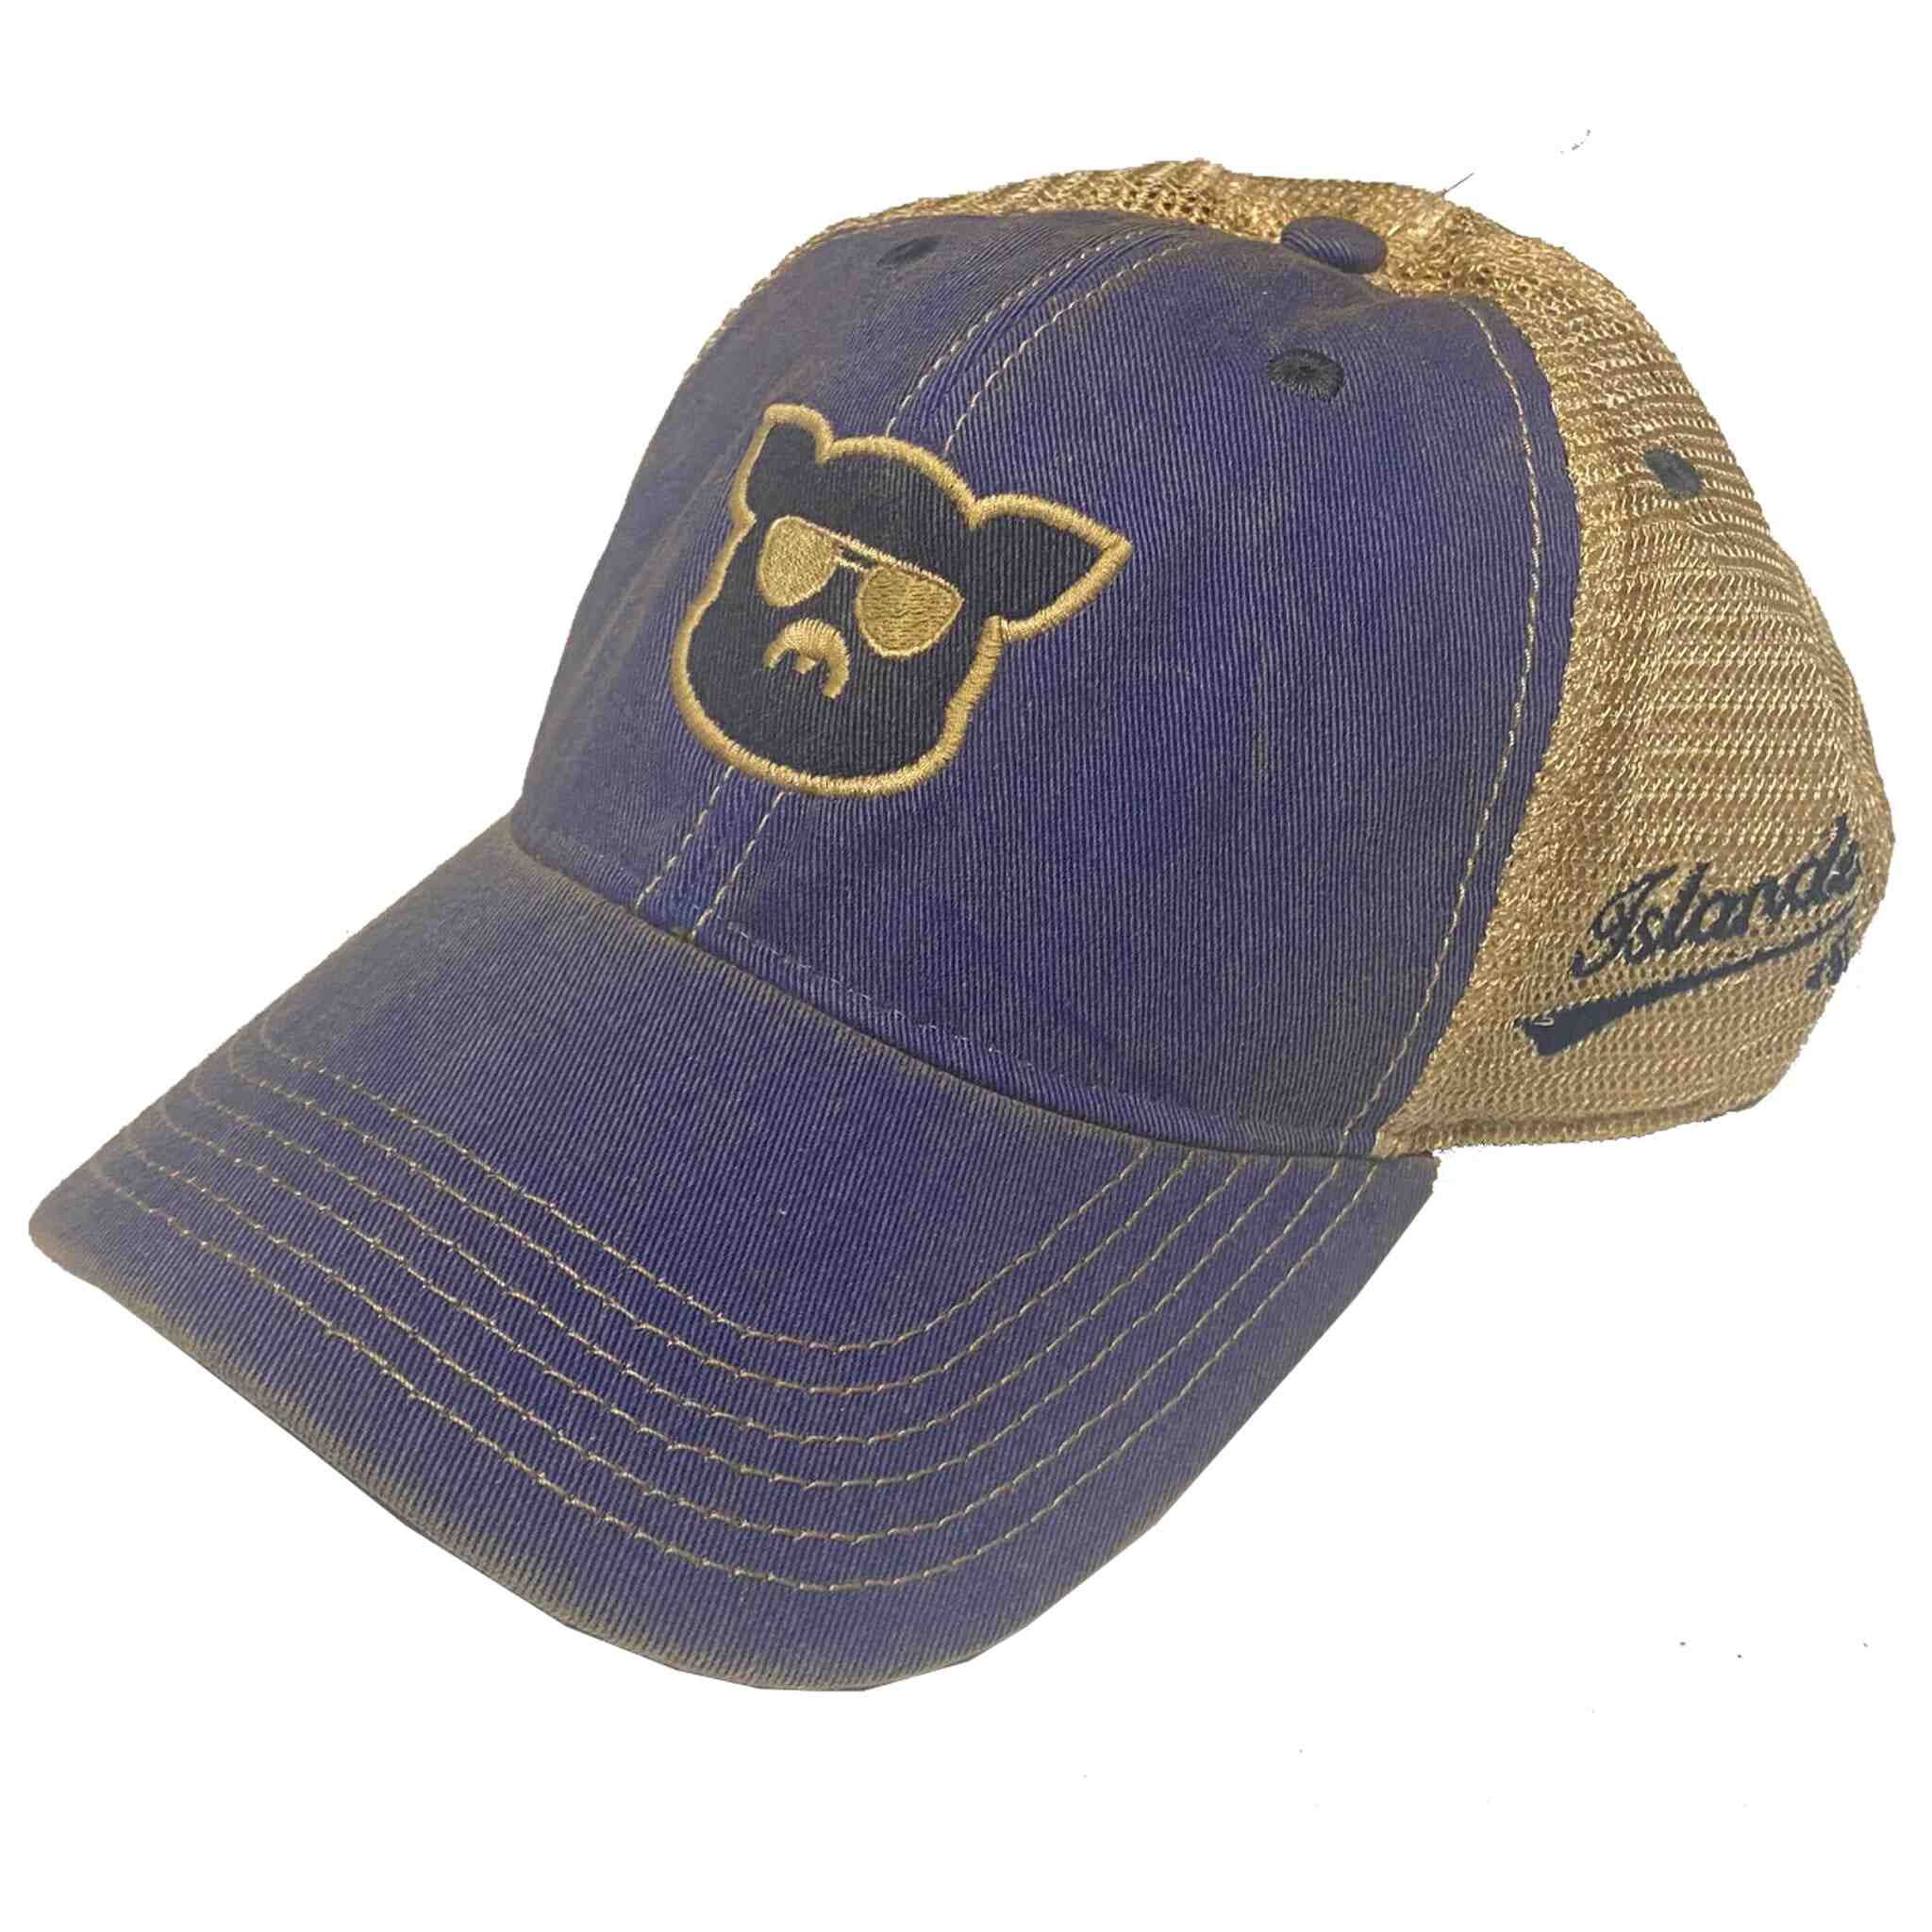 What is the string on a trucker hat for?